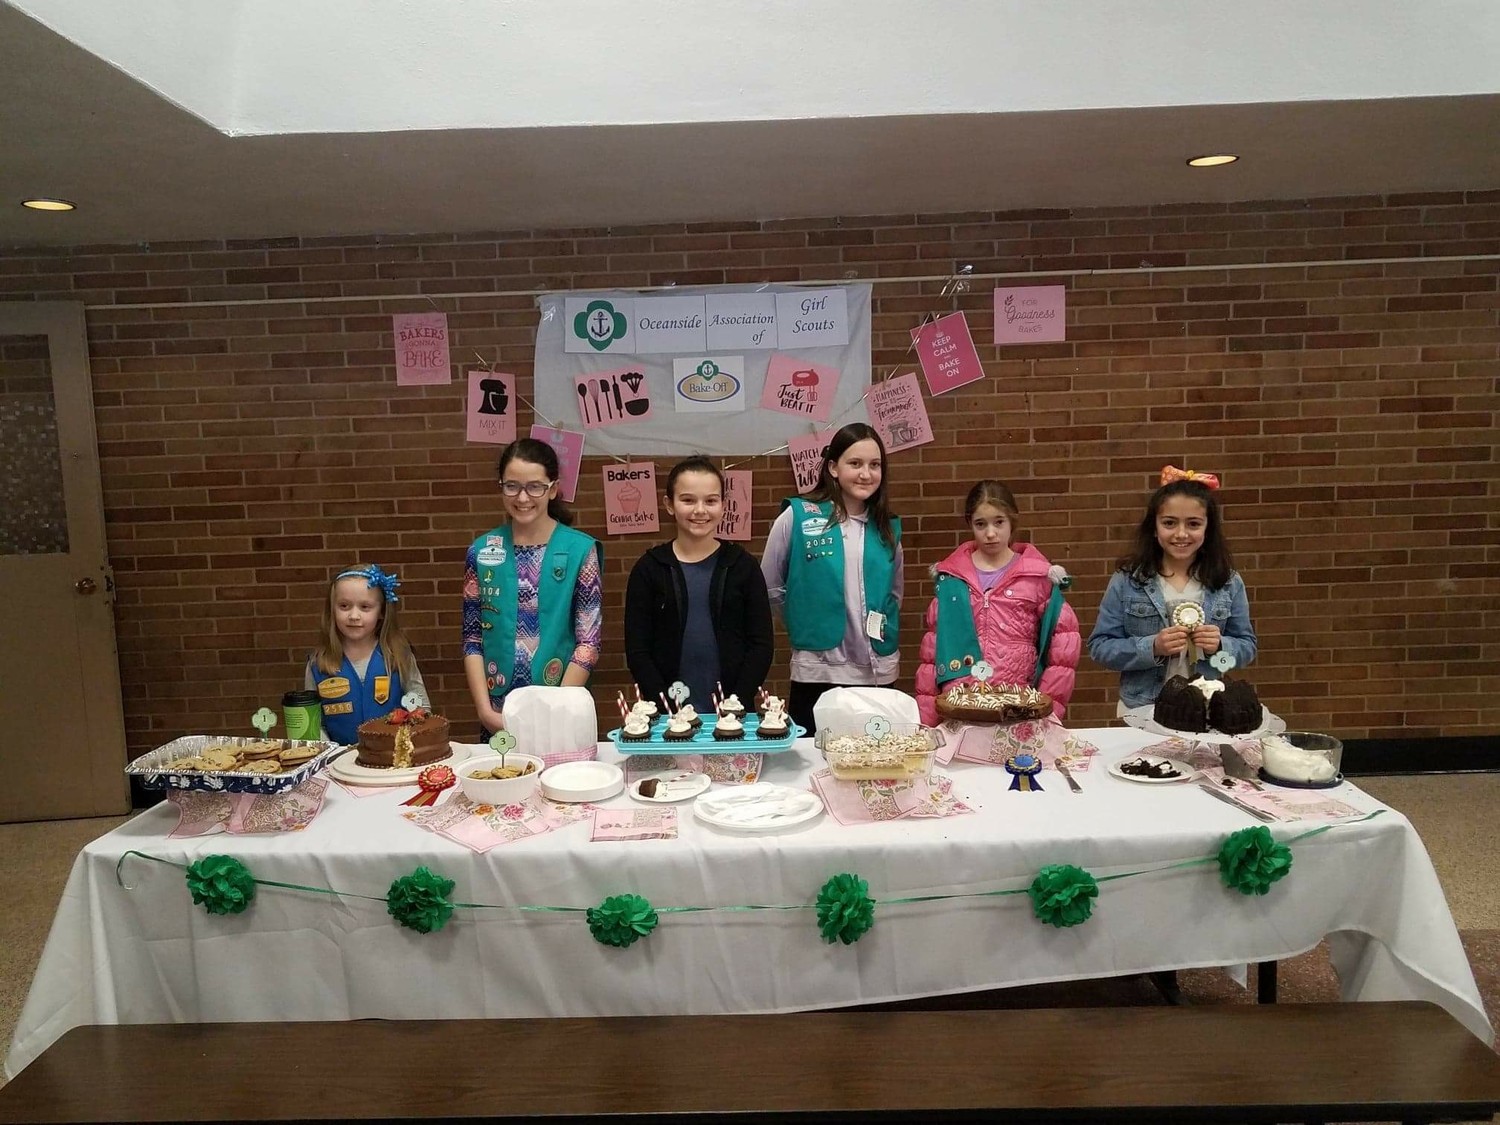 Oceanside Girl Scout members, Lilly Miller, left, Kaitlyn Rey, Riley Brasch, Kylee Griffin, Skylar Parker and Eliana de la Teja with their submitted cakes for the bake off.